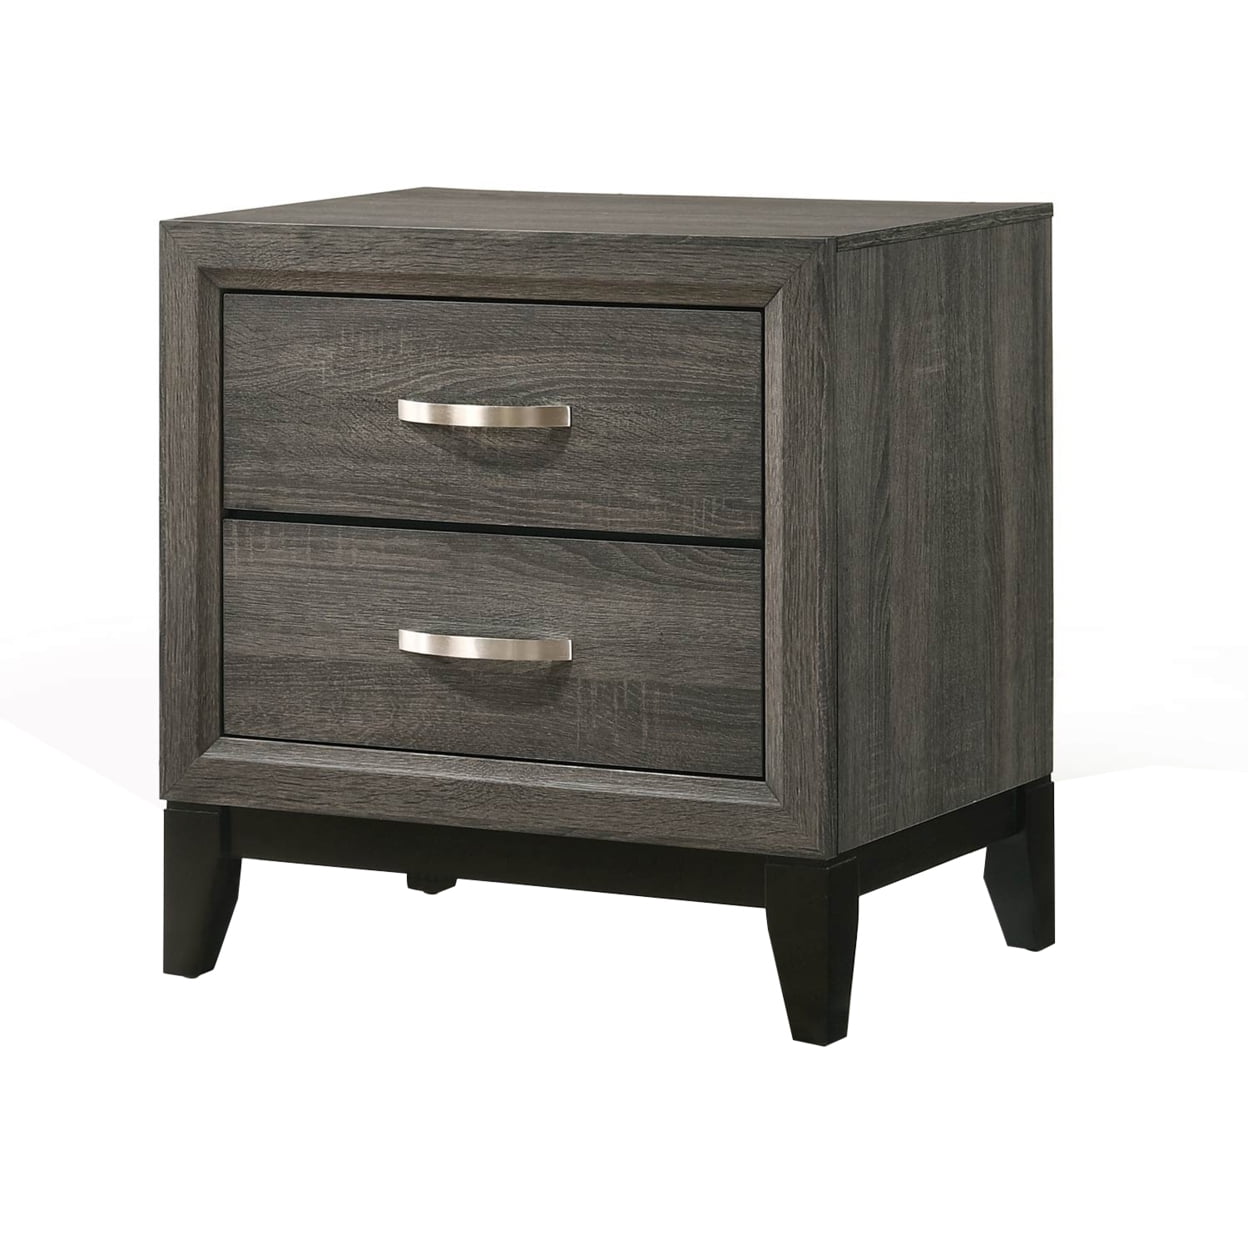 Picture of Acme Furniture 27053 24 x 16 x 25 in. Valdemar Nightstand, Weathered Gray